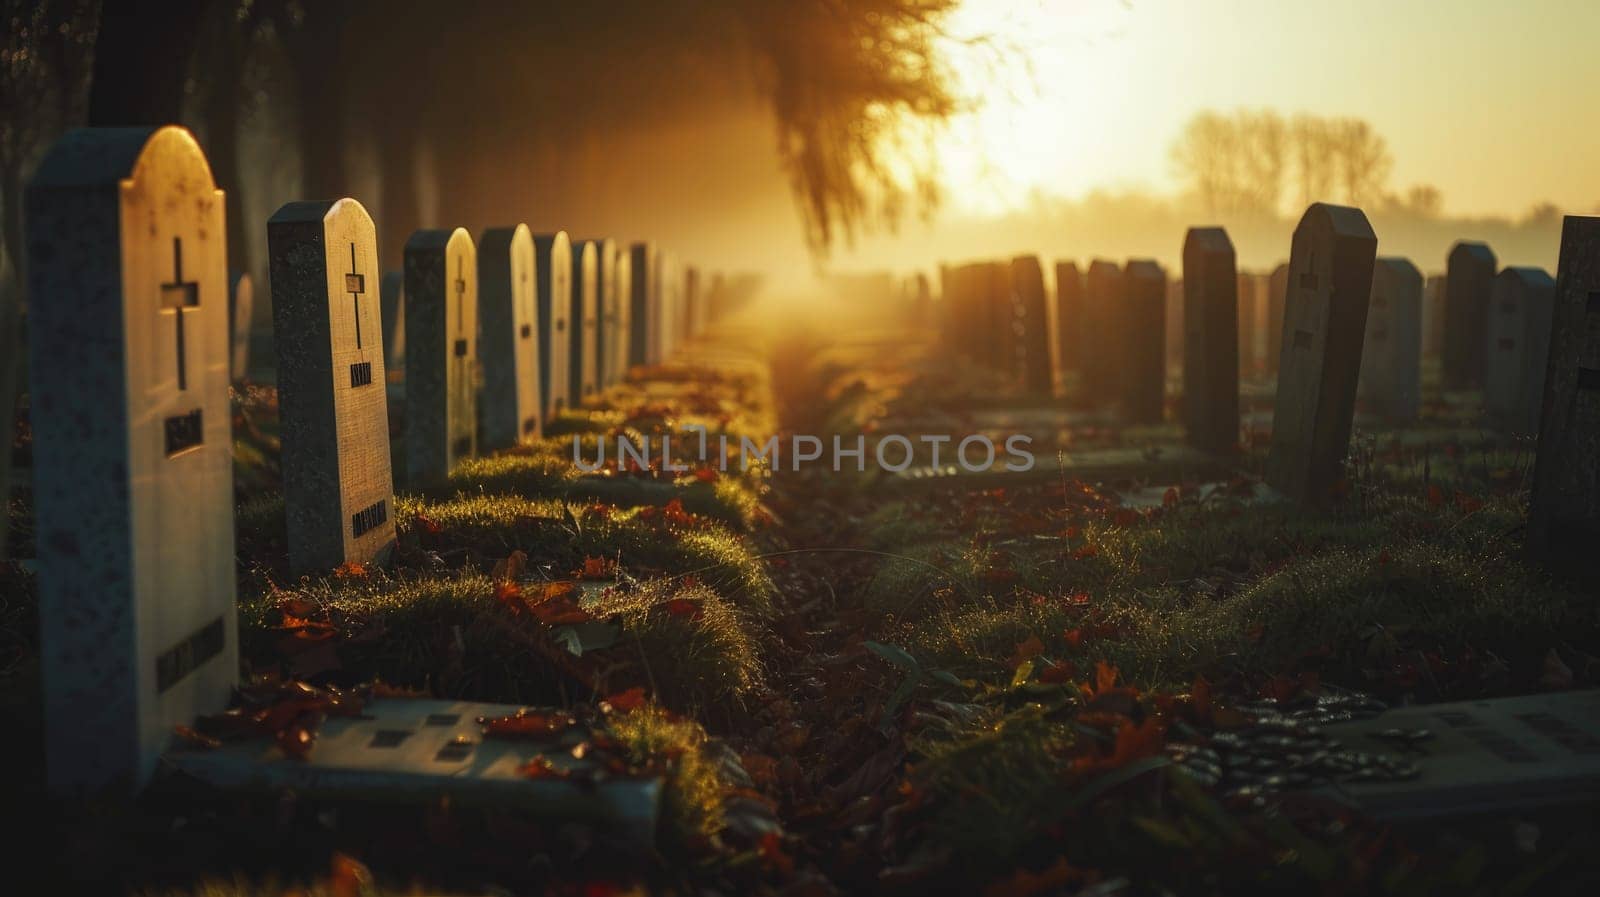 A military cemetery with rows of solemn gravestones, Concept of the legacy of those lost in war by nijieimu